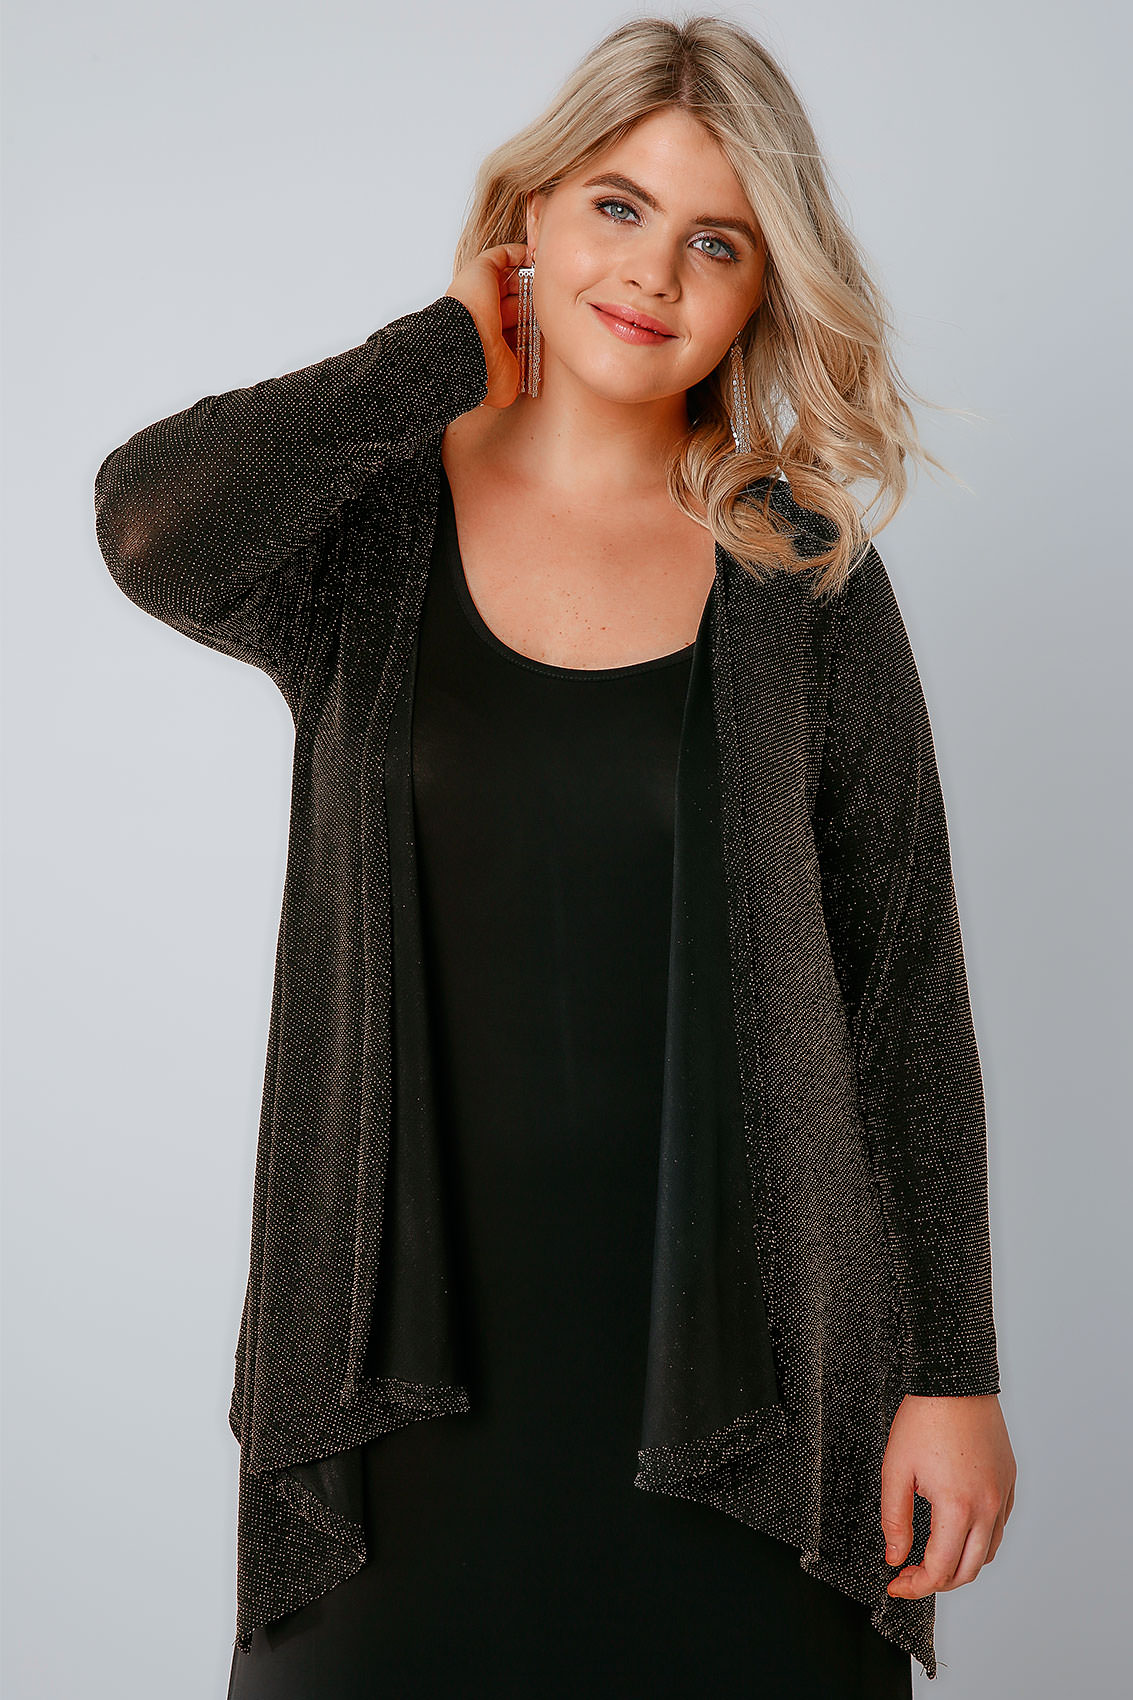 Black & Gold Sparkle Waterfall Cardigan, Plus size 16 to 32